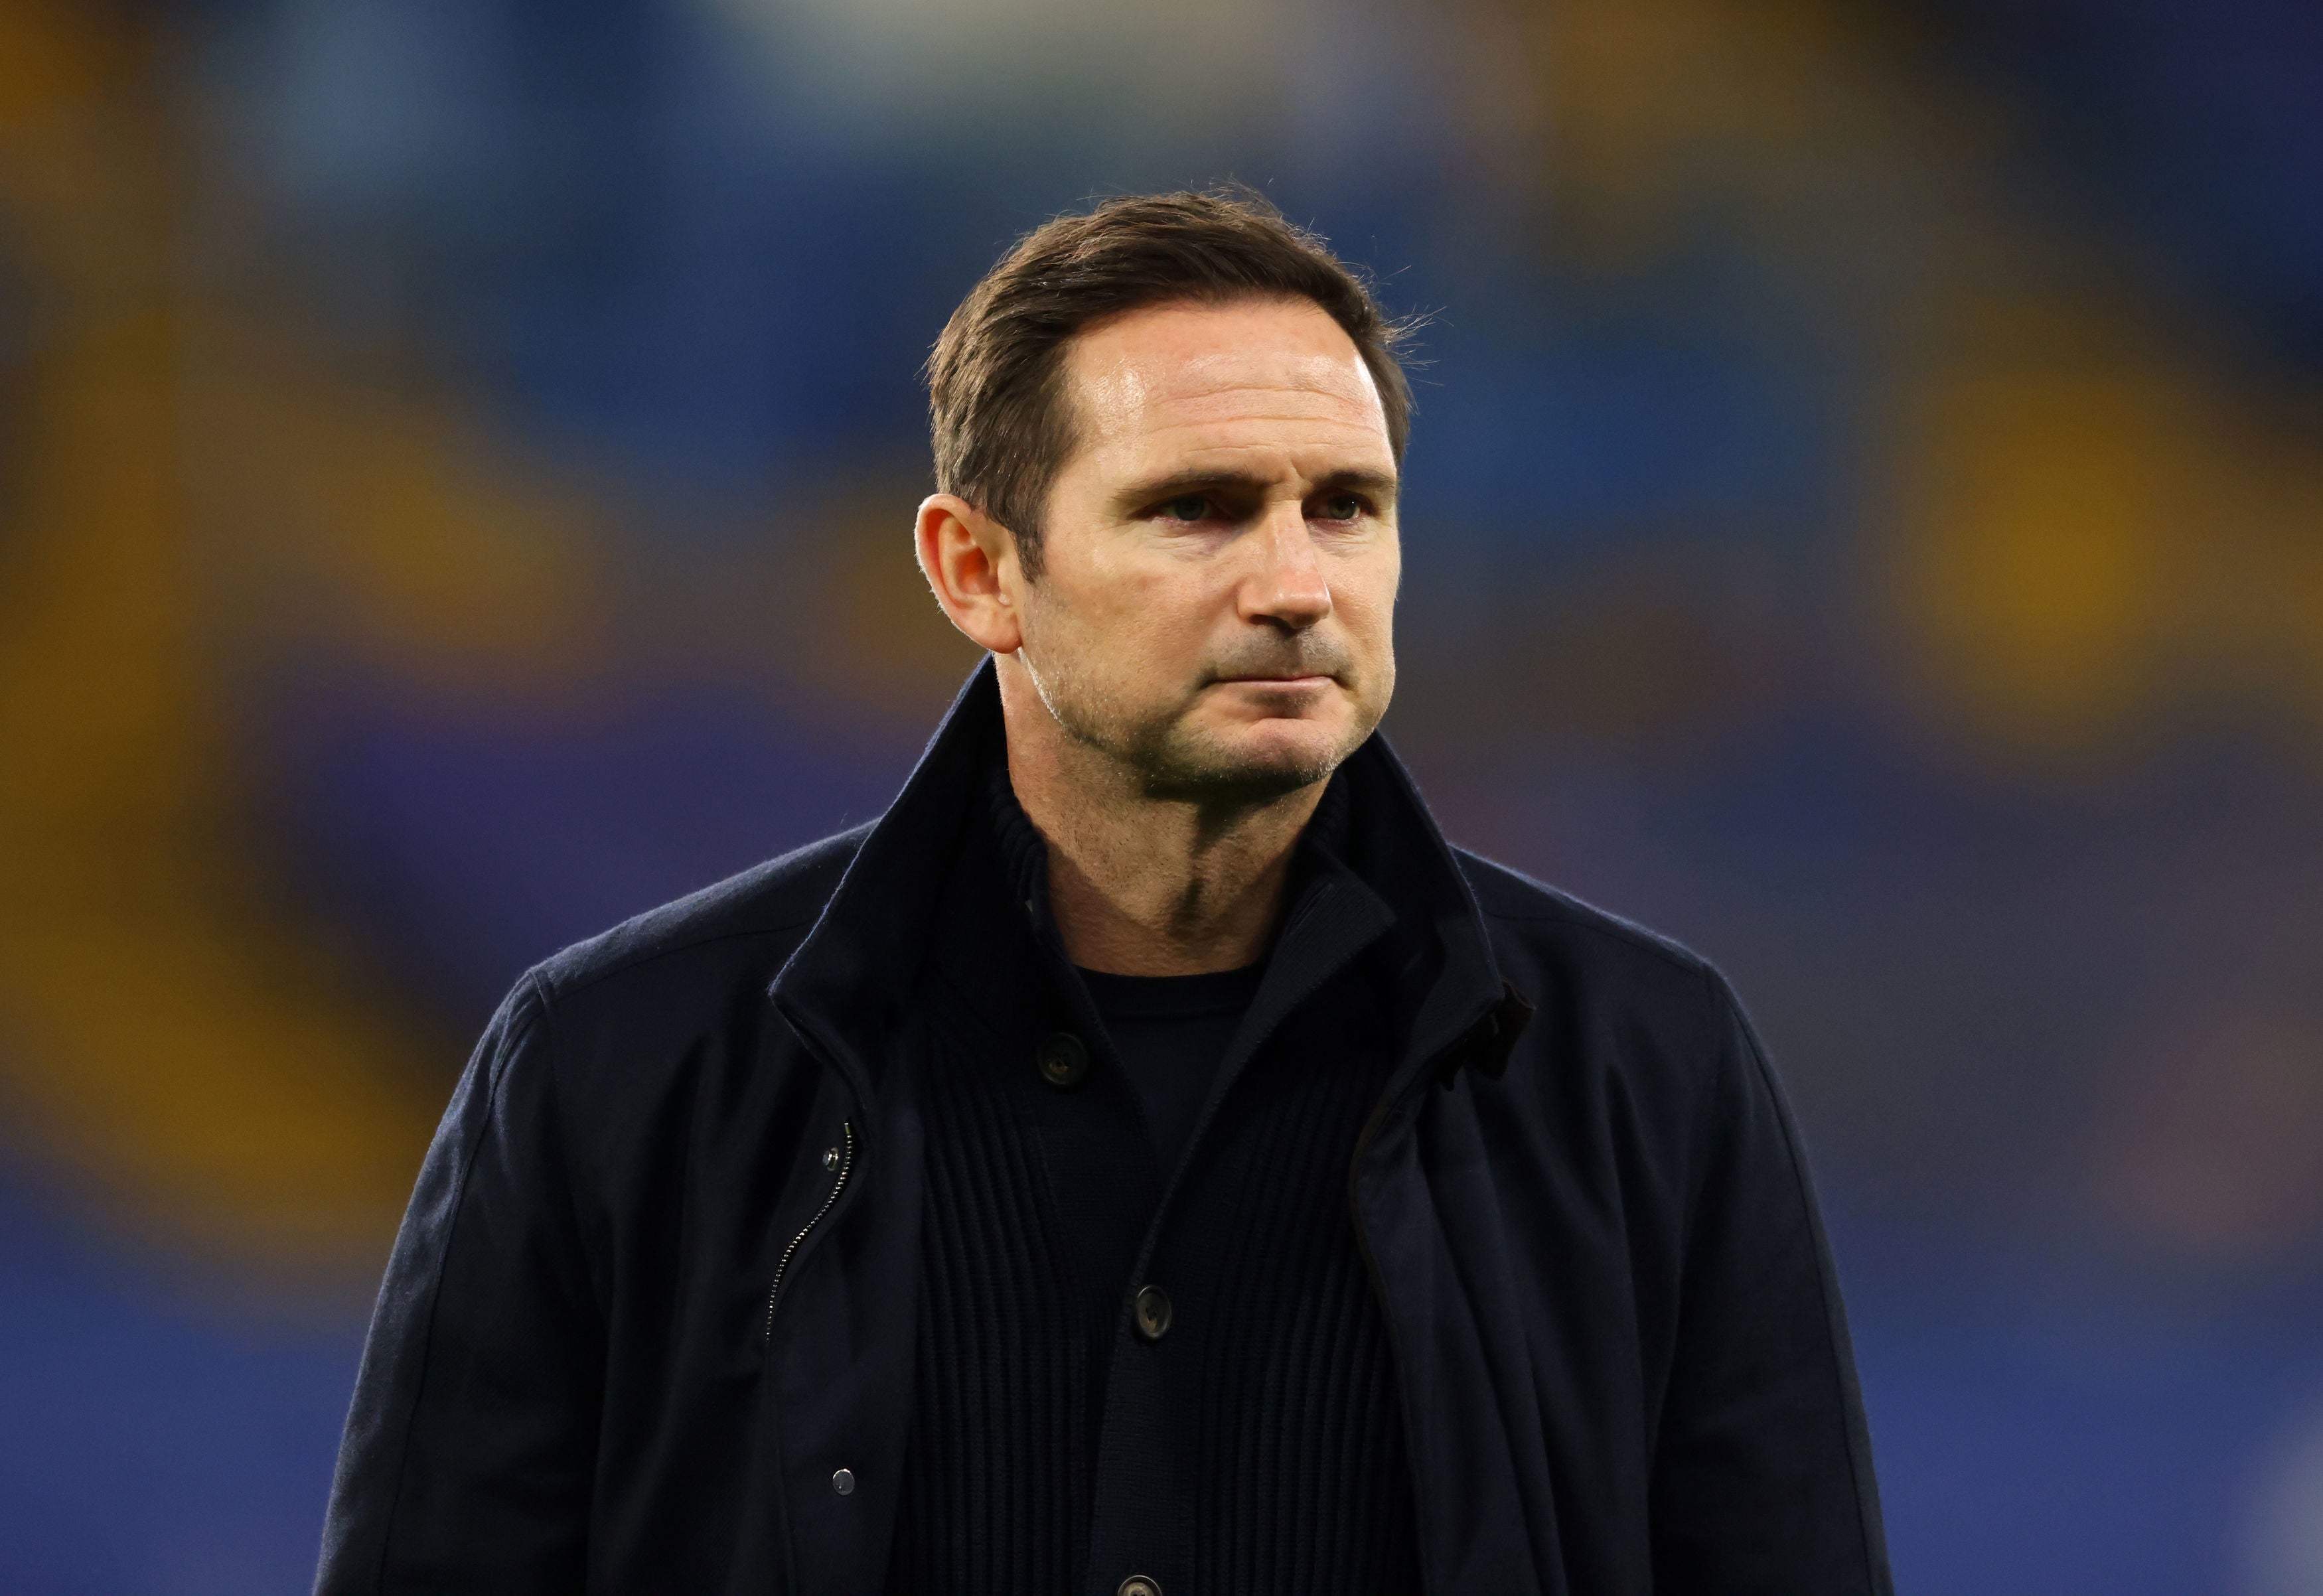 Frank Lampard was sacked as Chelsea manager midway through his second season in charge